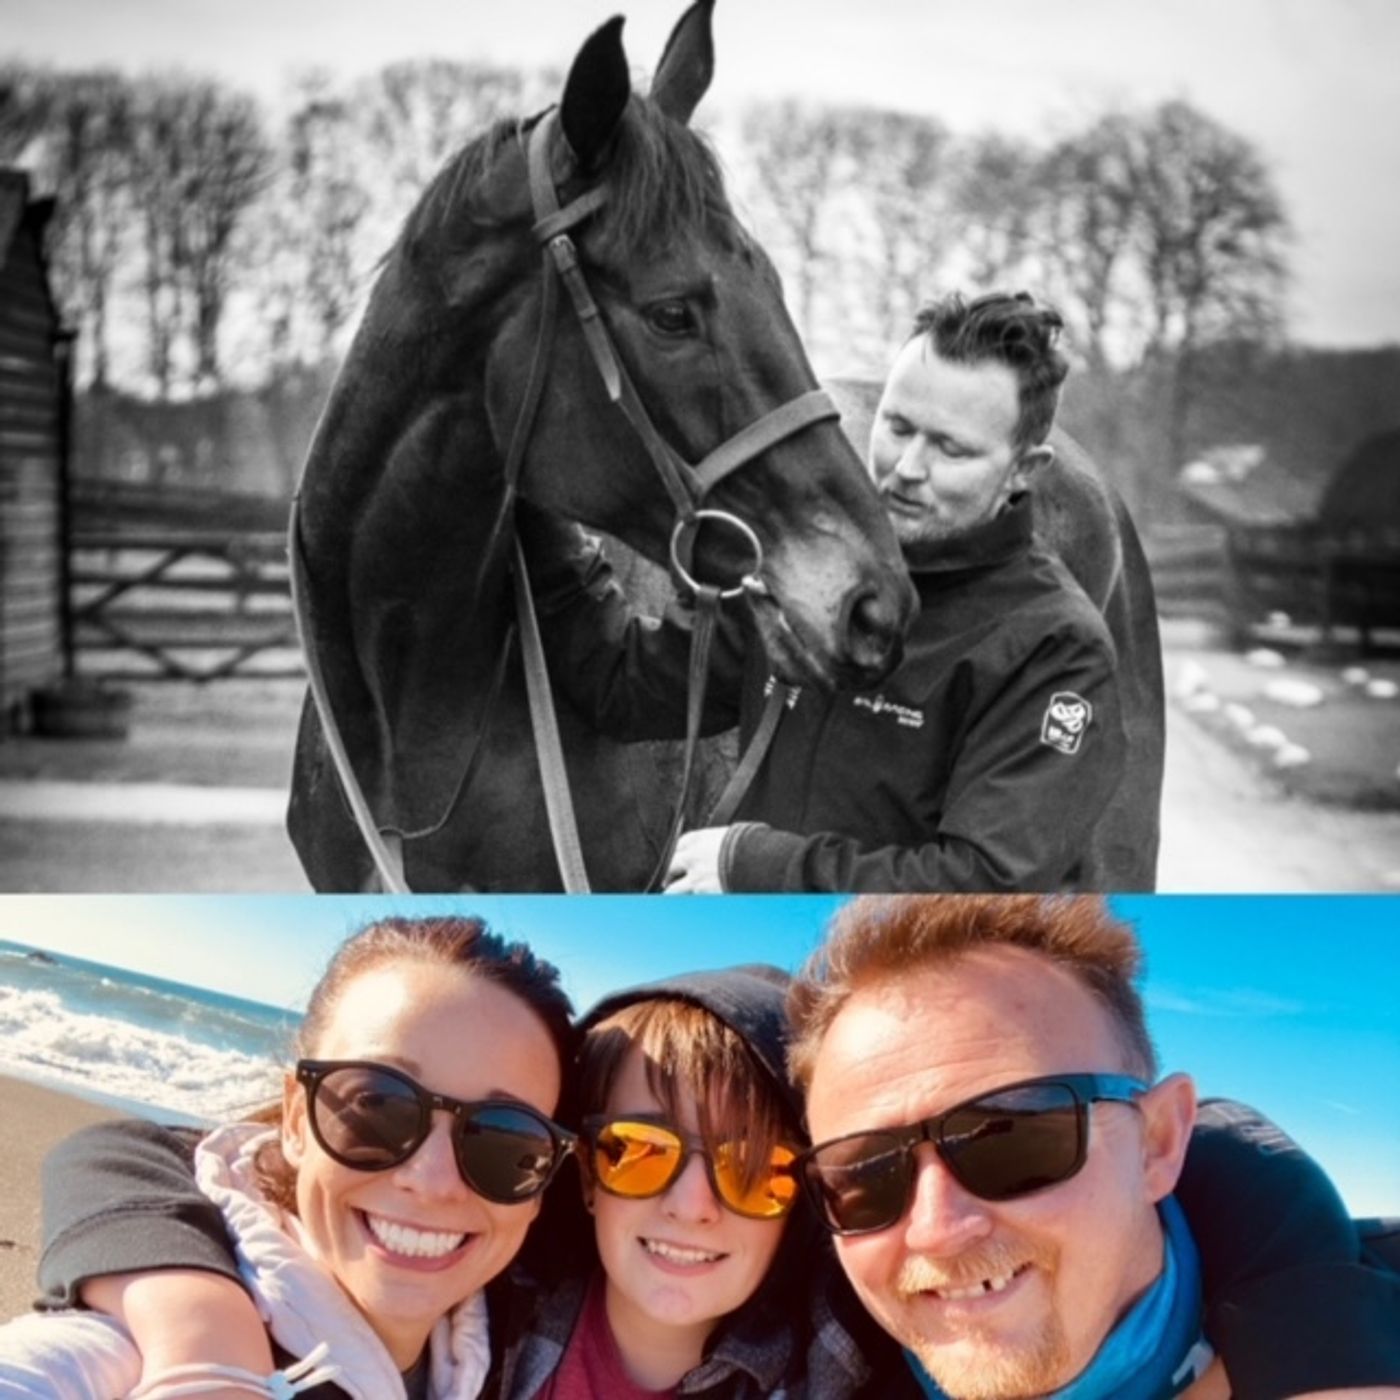 9: NATHAN HORROCKS- Super honest, super cheerful, ex Jockey turned Film Director talks abandonment, dyslexia, riding sixty winners, anorexia, social media, one day not wishing to wake up, and how one horse changed everything.